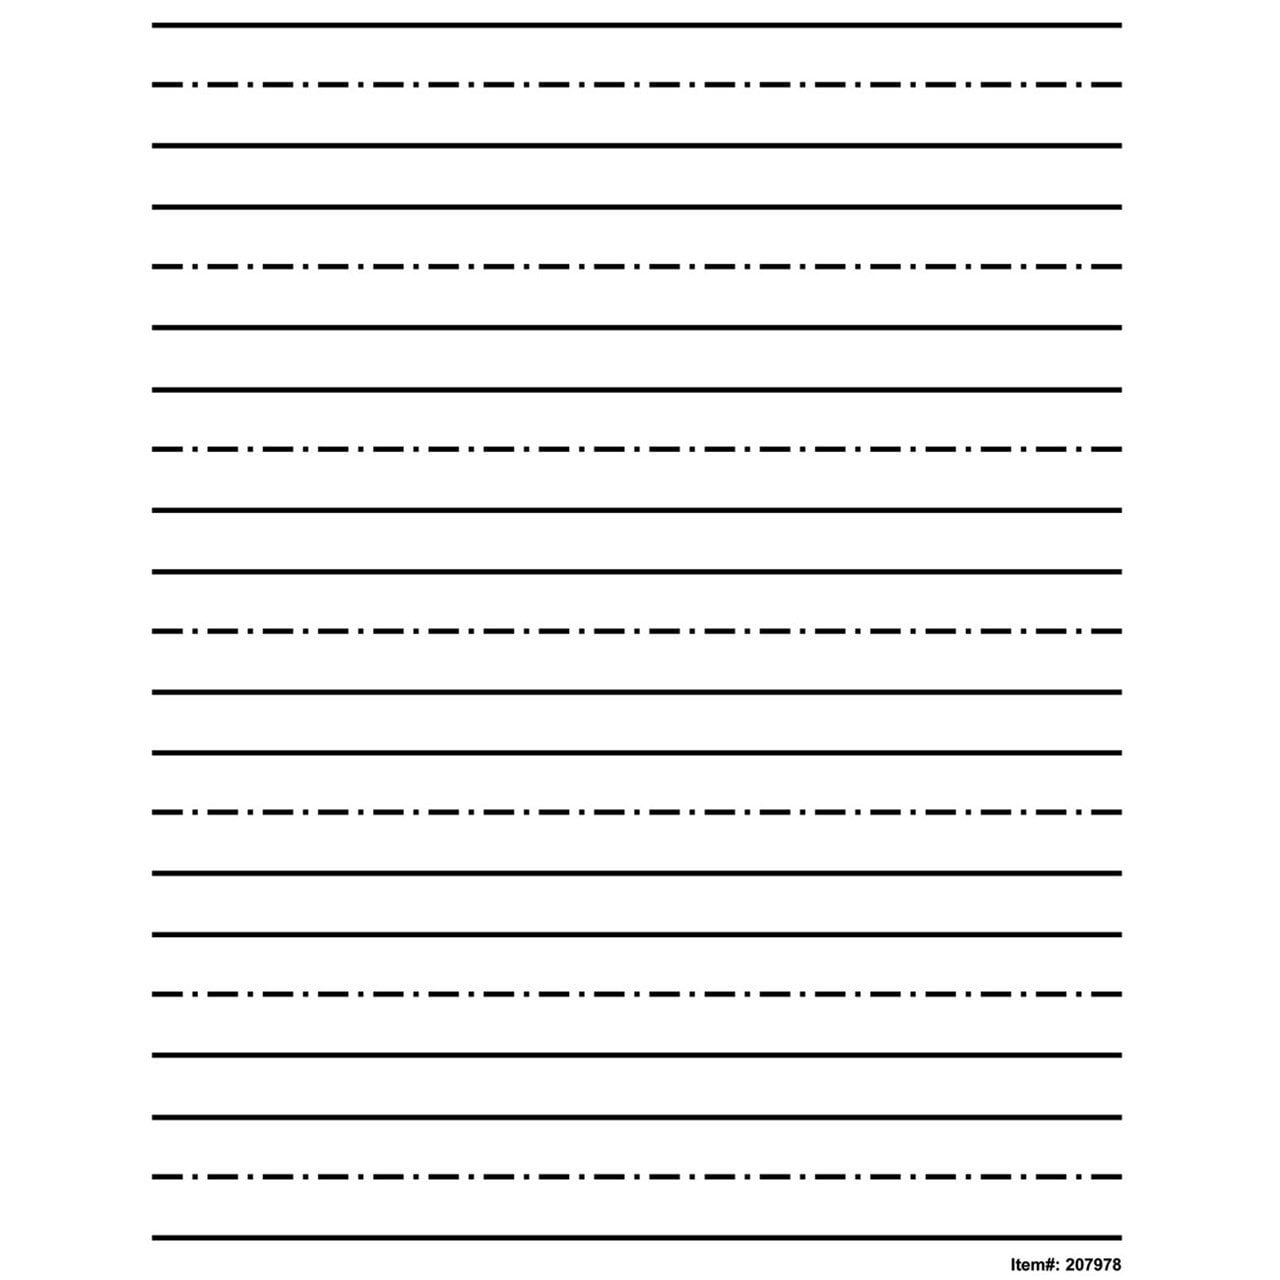 Dotted Line Writing Paper Template